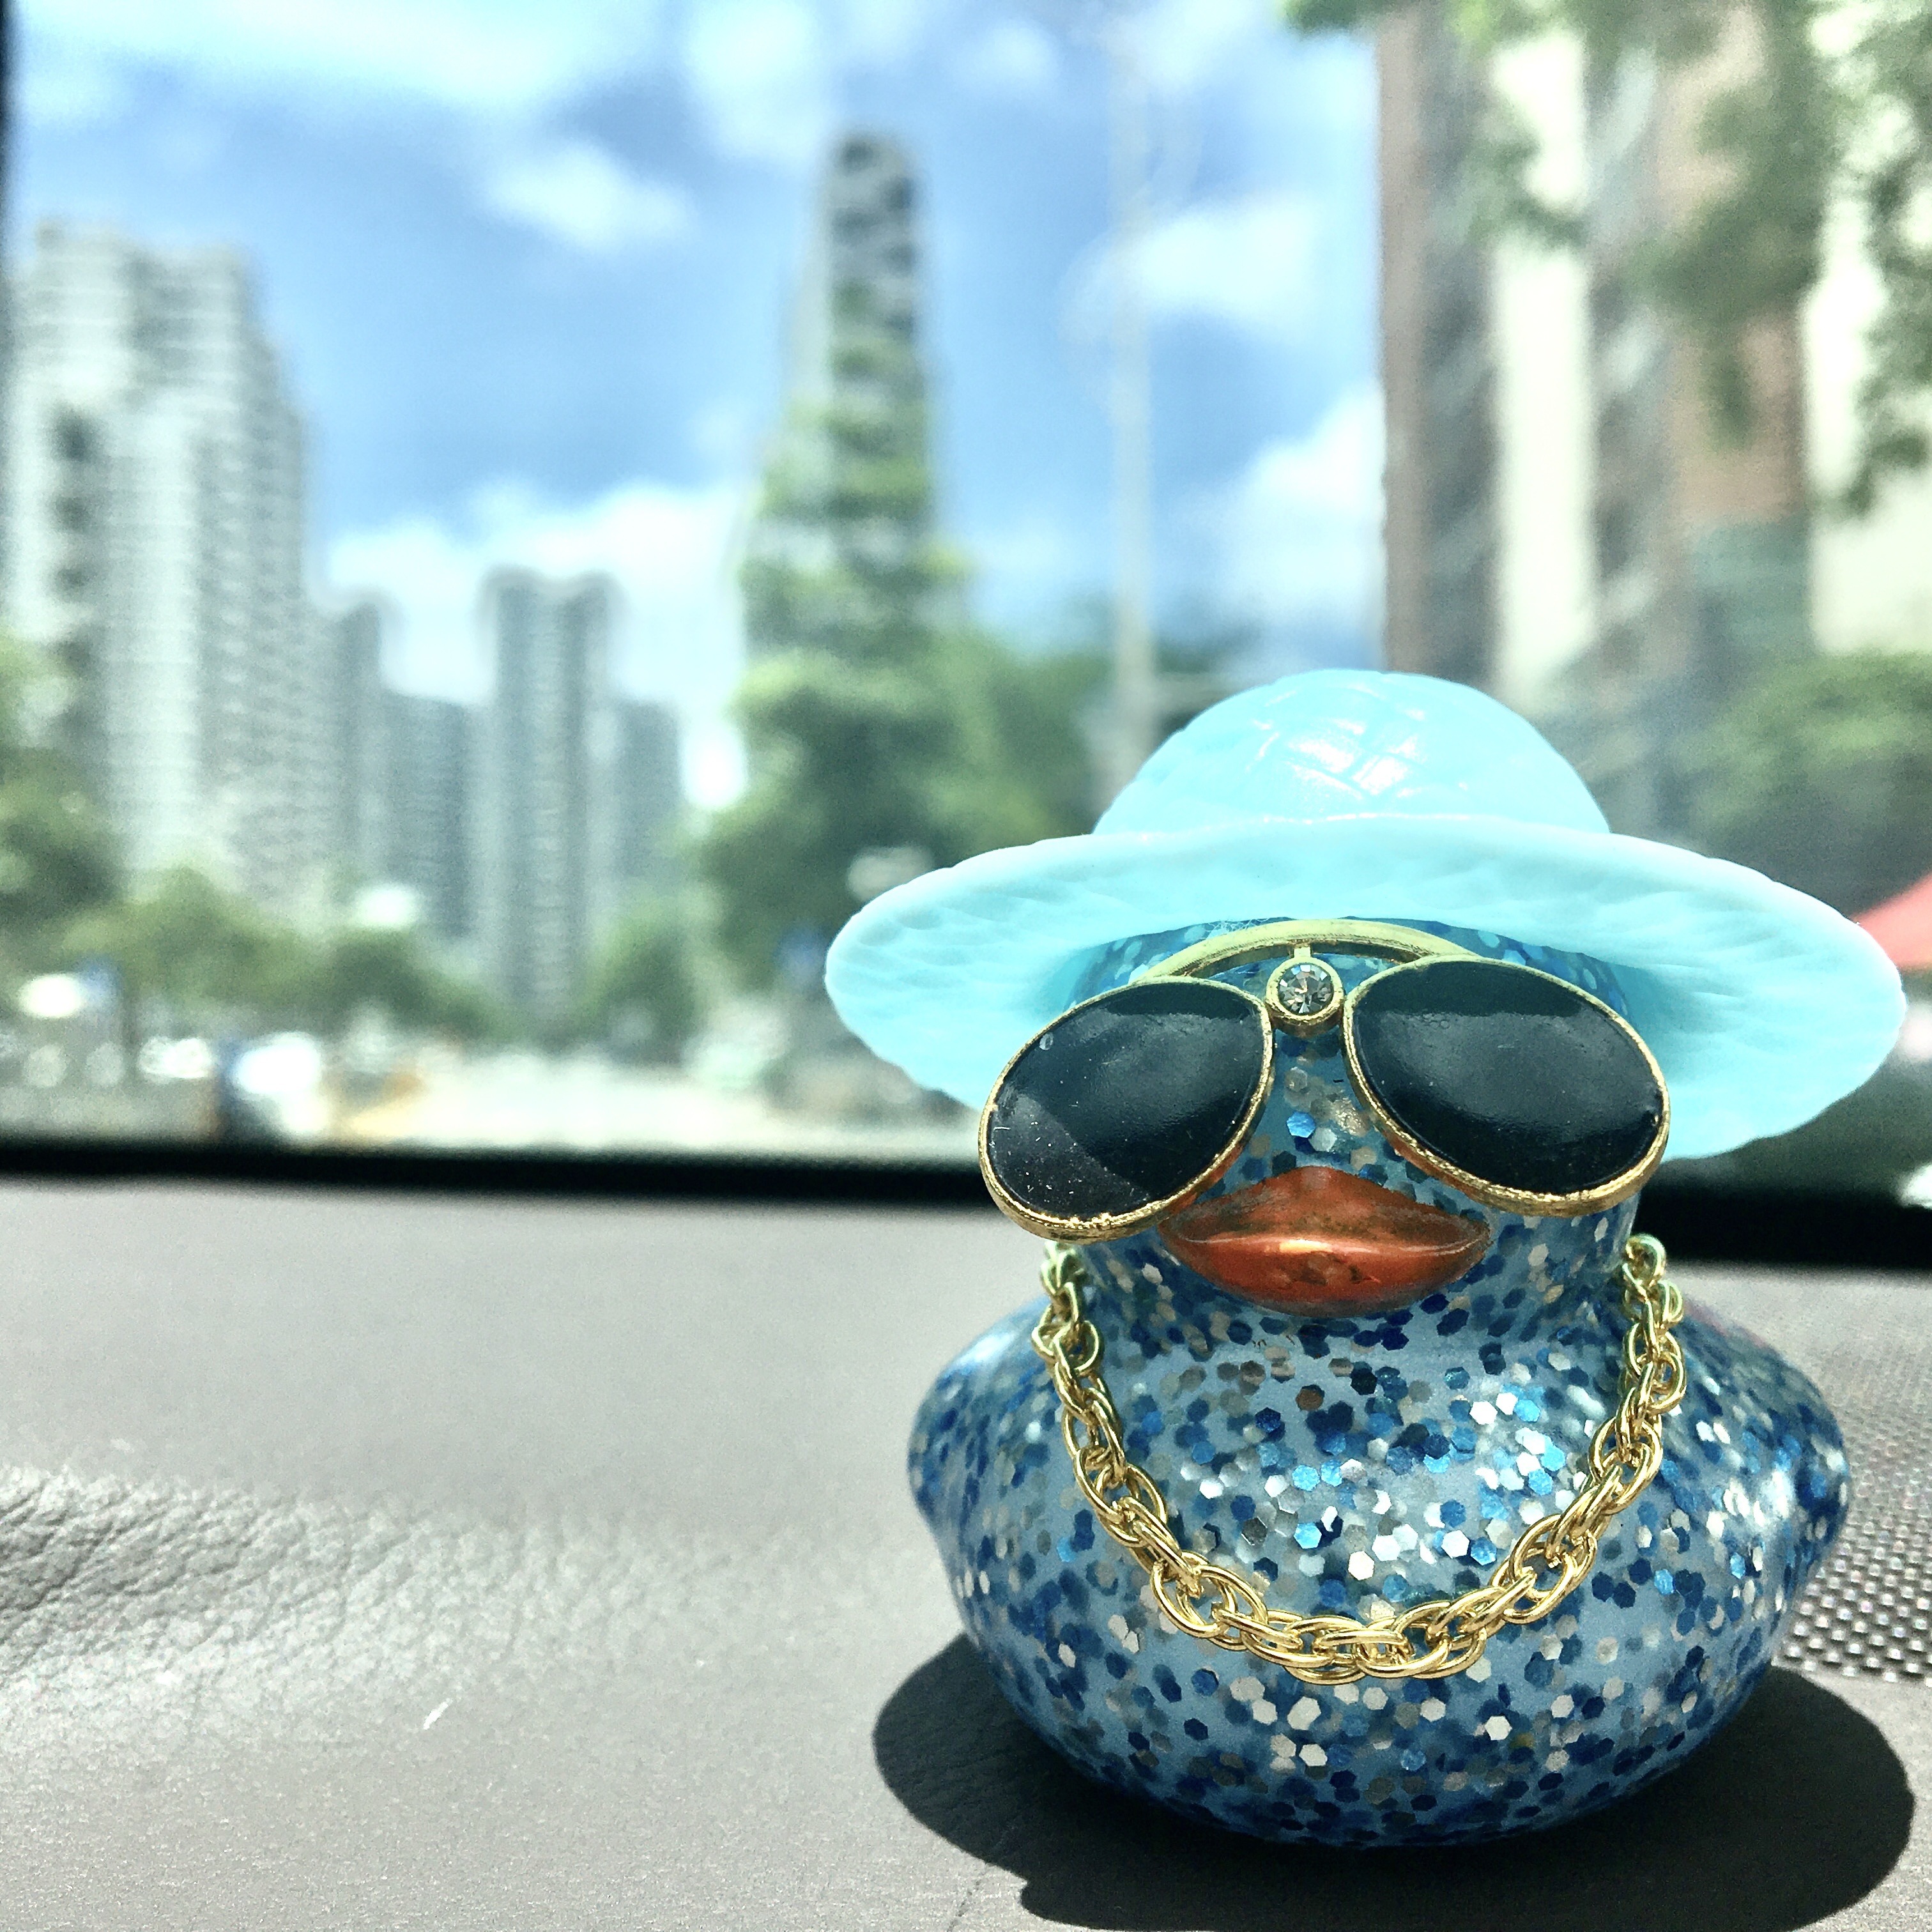 

Rubber Ducks Car Duck Duck Toy Car Ornaments, Duck Car Dashboard Car Accessories Ducks, For Mini Ducks Gift With Sunglasses Hat And Necklace